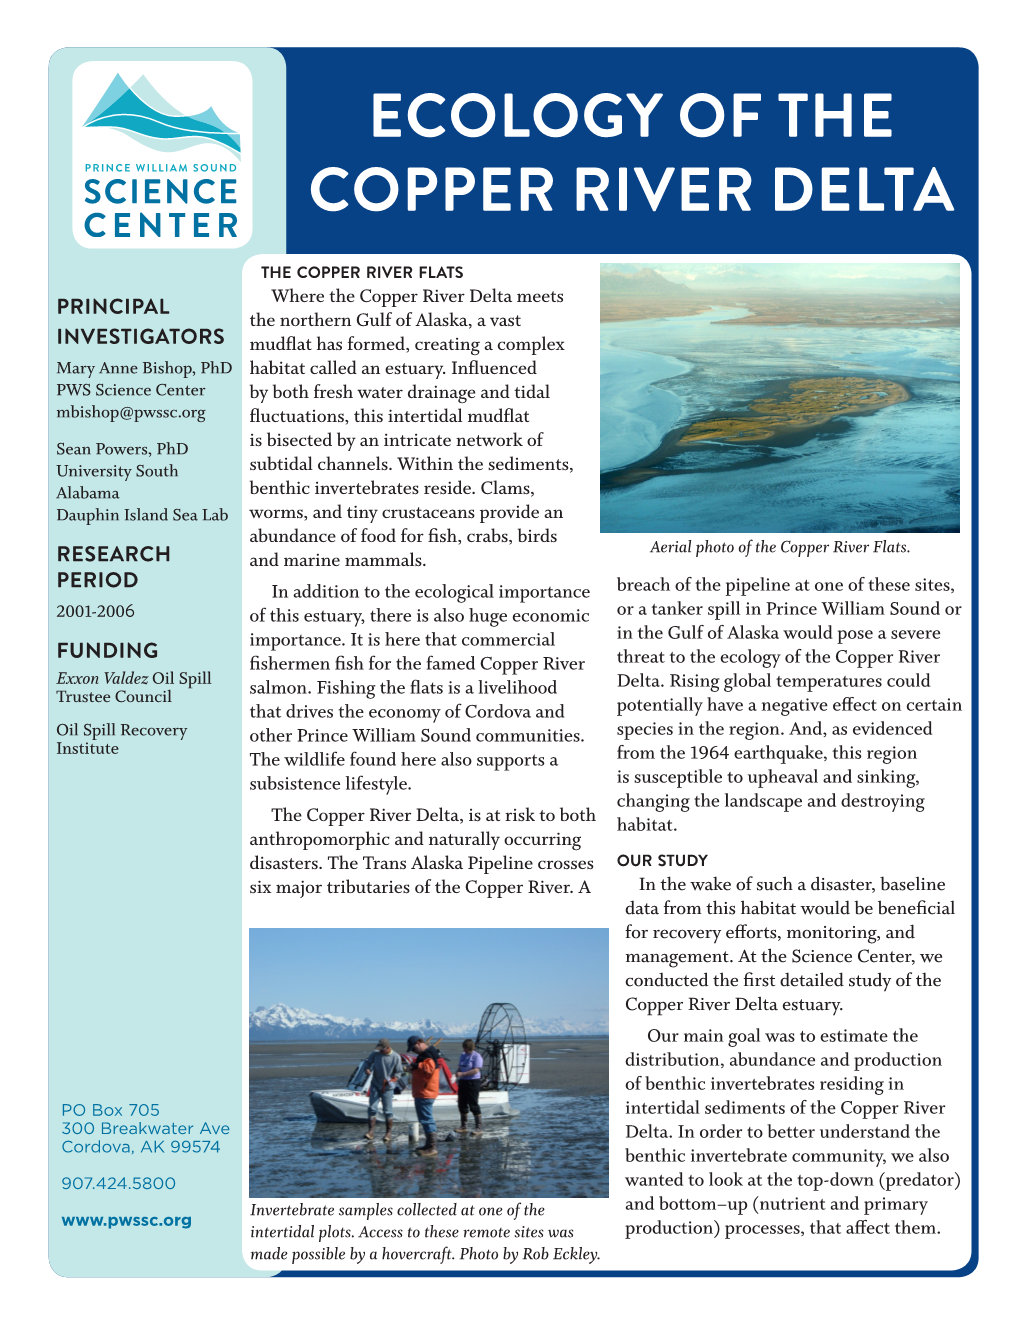 Ecology of the Copper River Delta